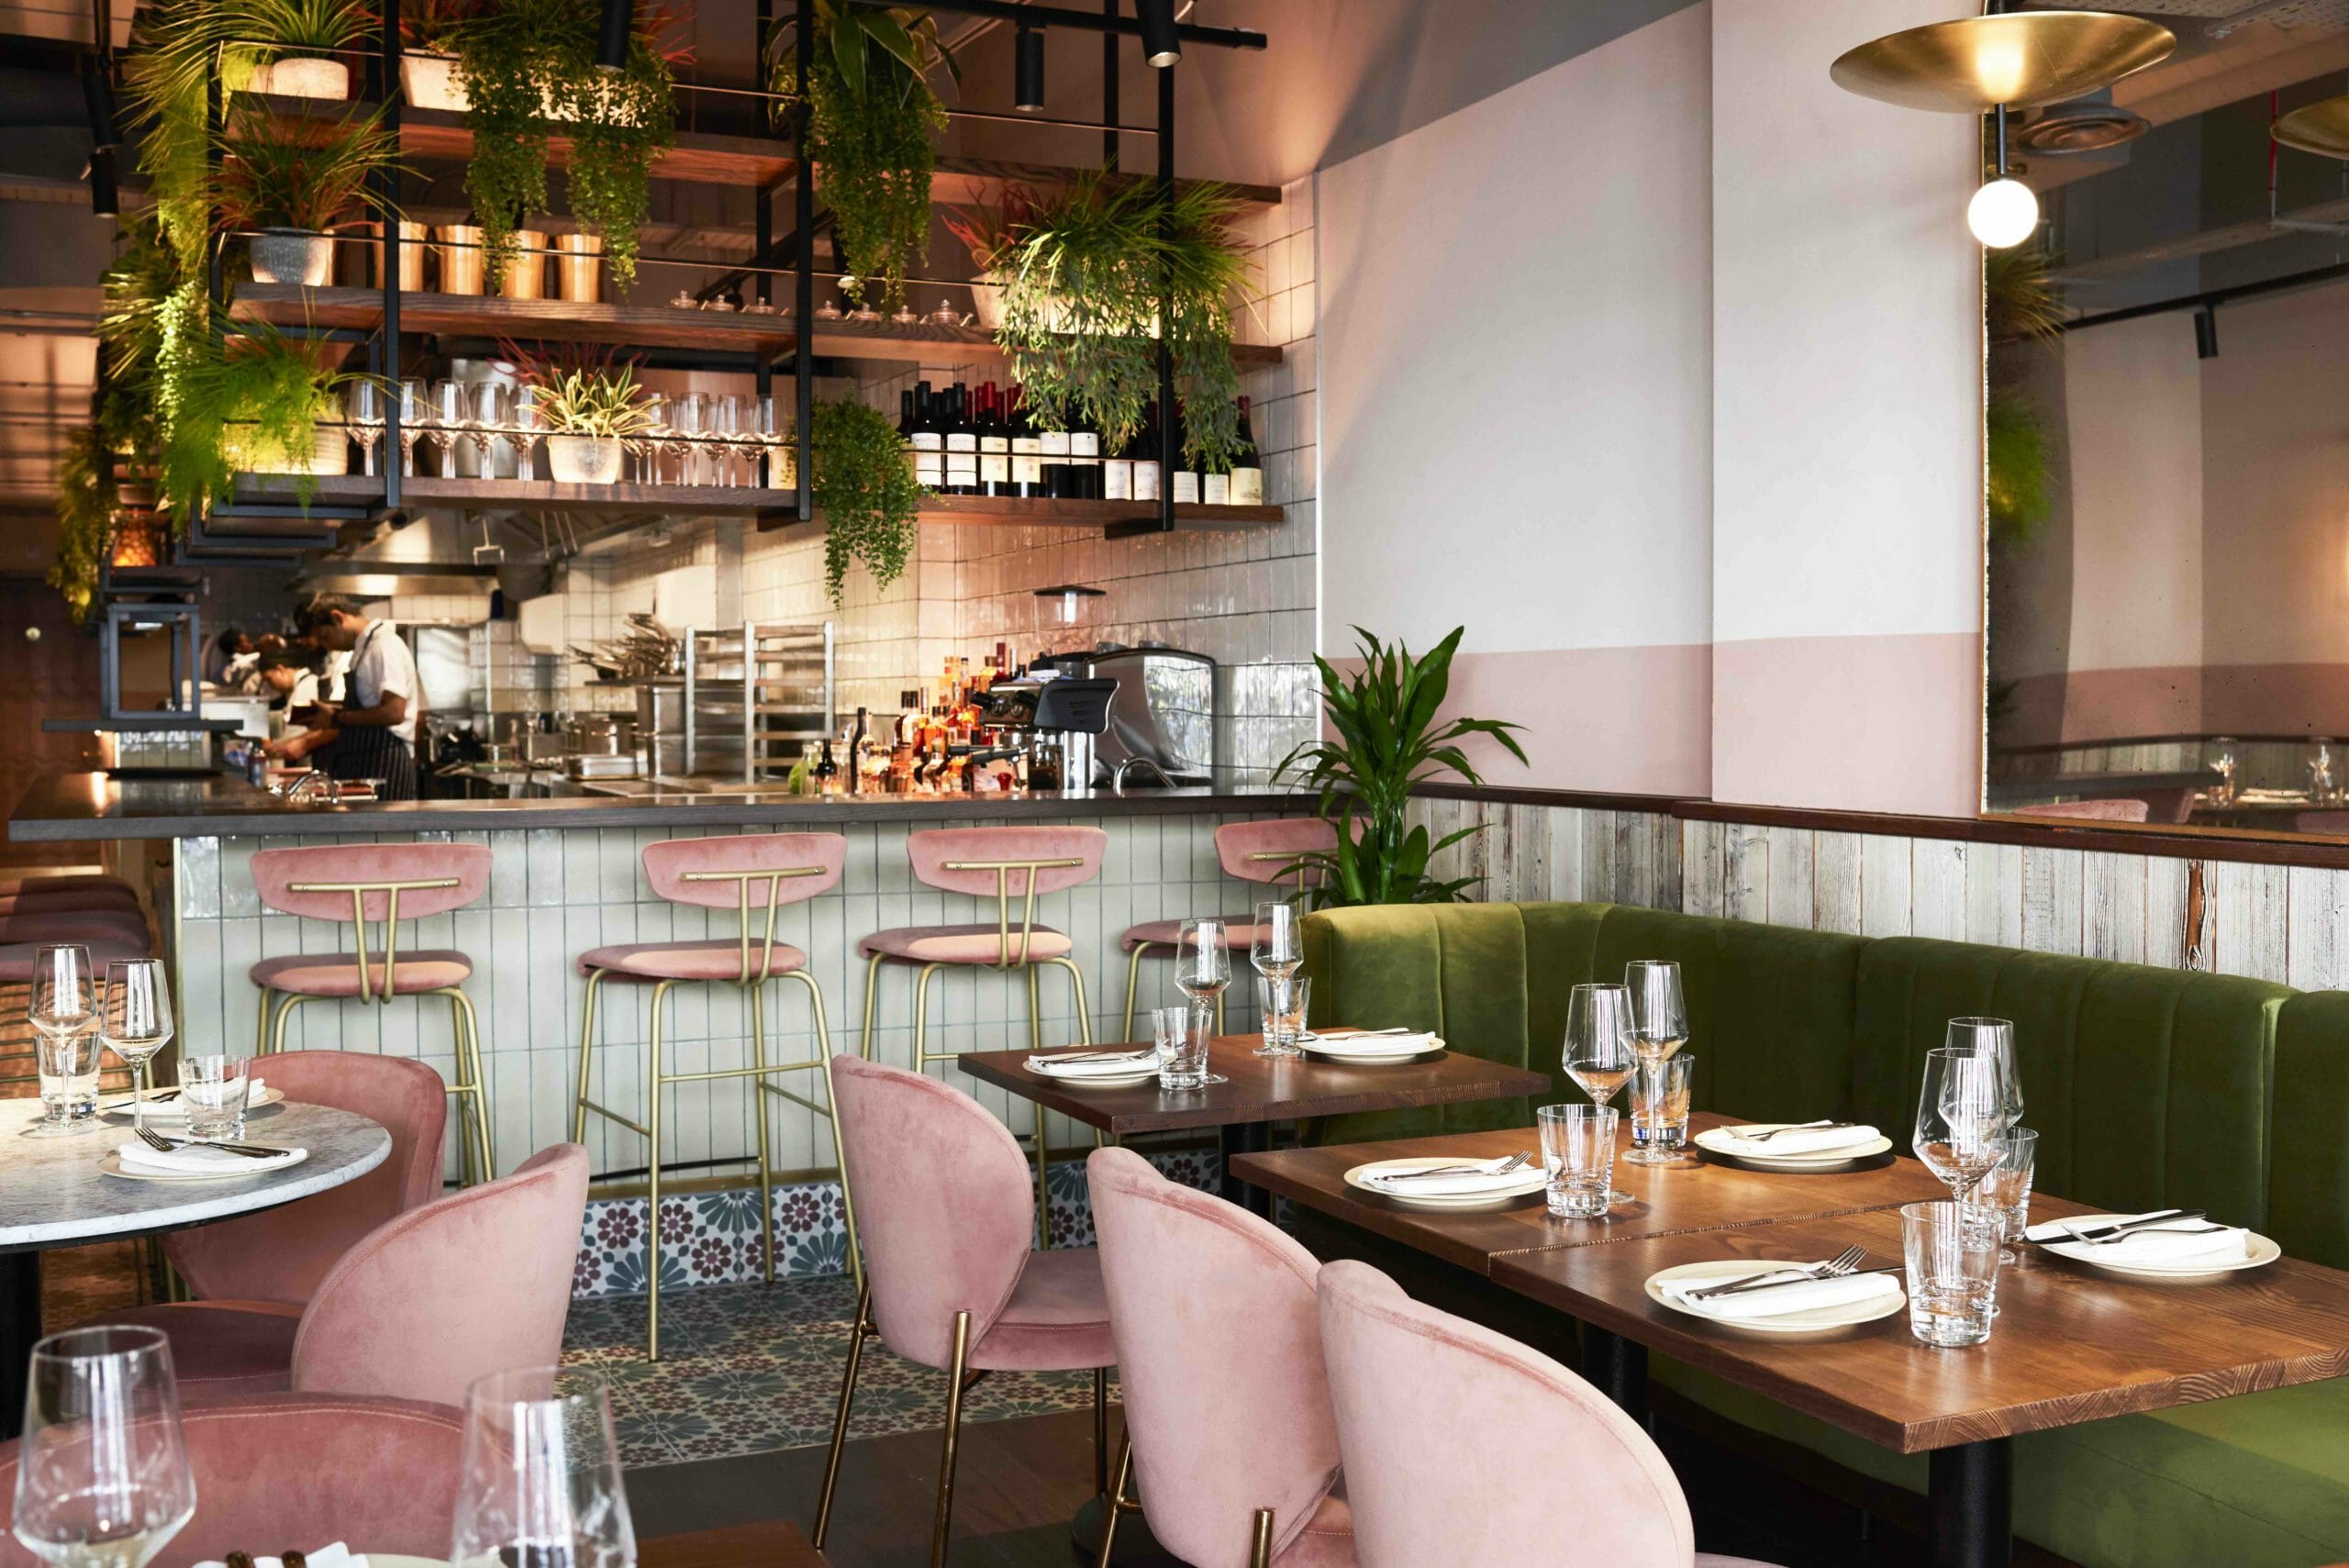 The Best Covent Garden Restaurants | 15 Great Central London Eateries